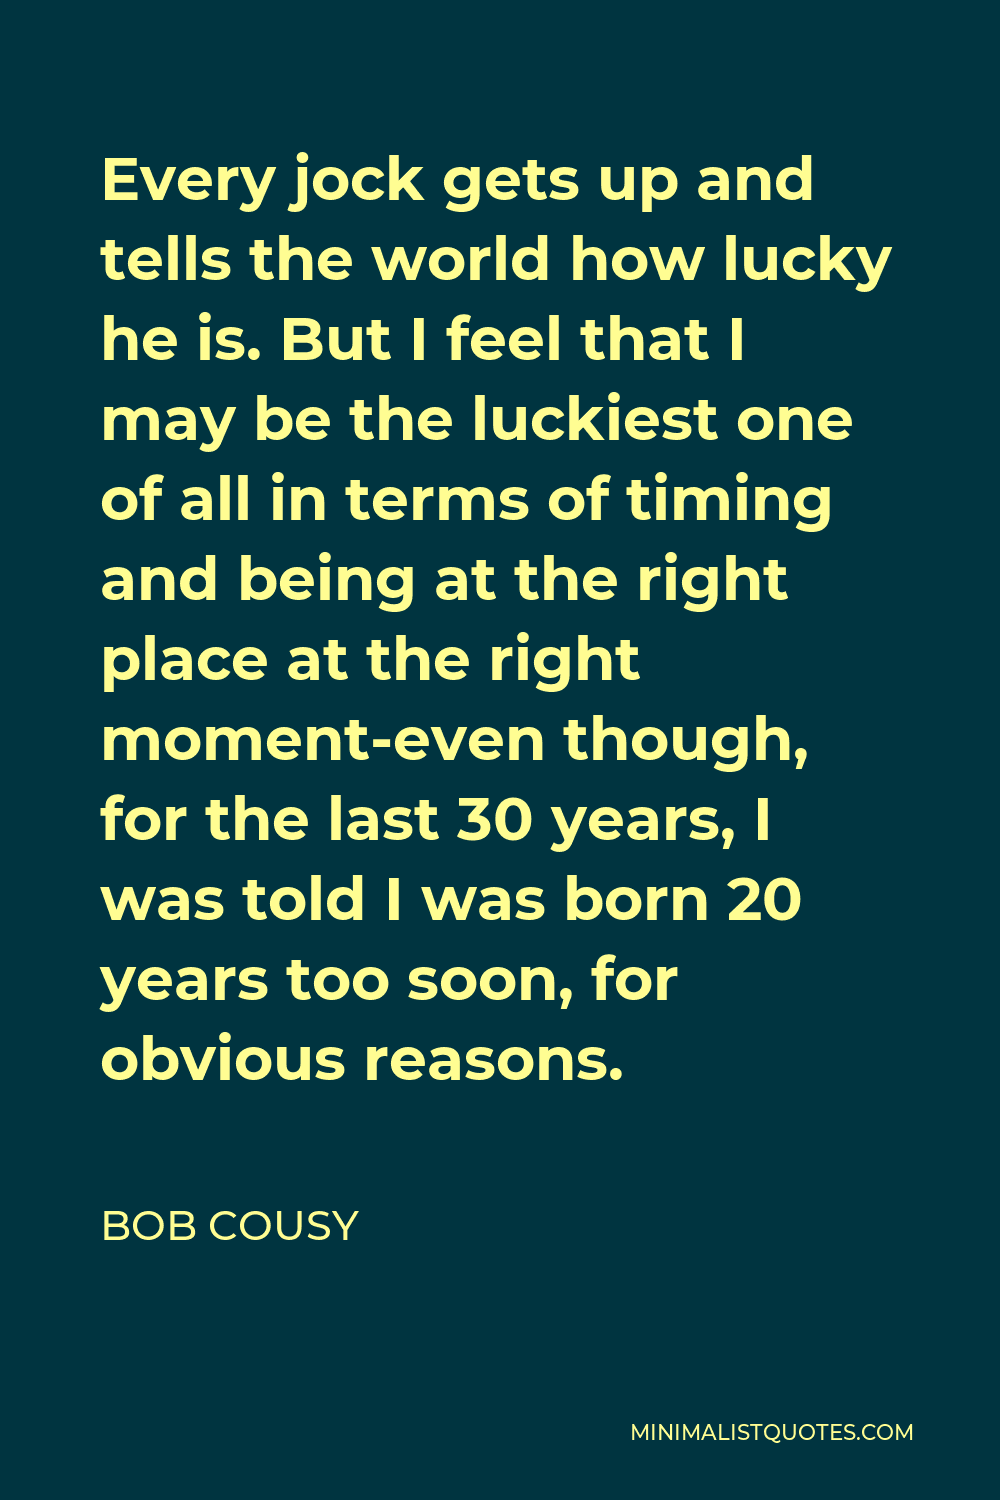 Bob Cousy Quote - Every jock gets up and tells the world how lucky he is. But I feel that I may be the luckiest one of all in terms of timing and being at the right place at the right moment-even though, for the last 30 years, I was told I was born 20 years too soon, for obvious reasons.